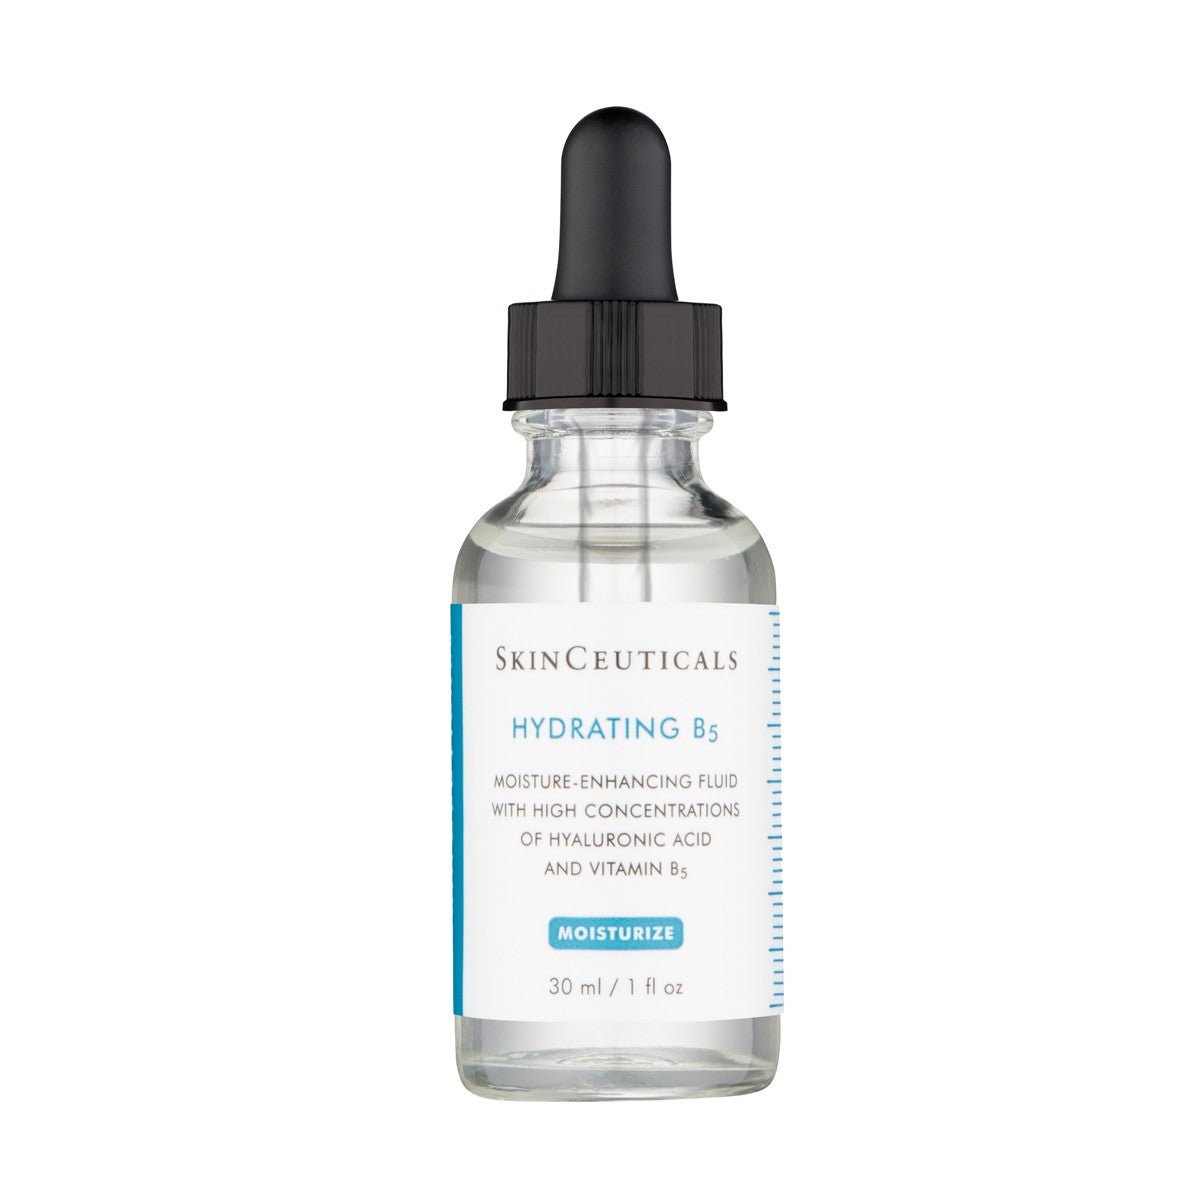 SkinCeuticals Hydrating B5 Gel 30ml - Dr. Pen Store - SkinCeuticals Buy Genuine Dr Pen Products with Trust